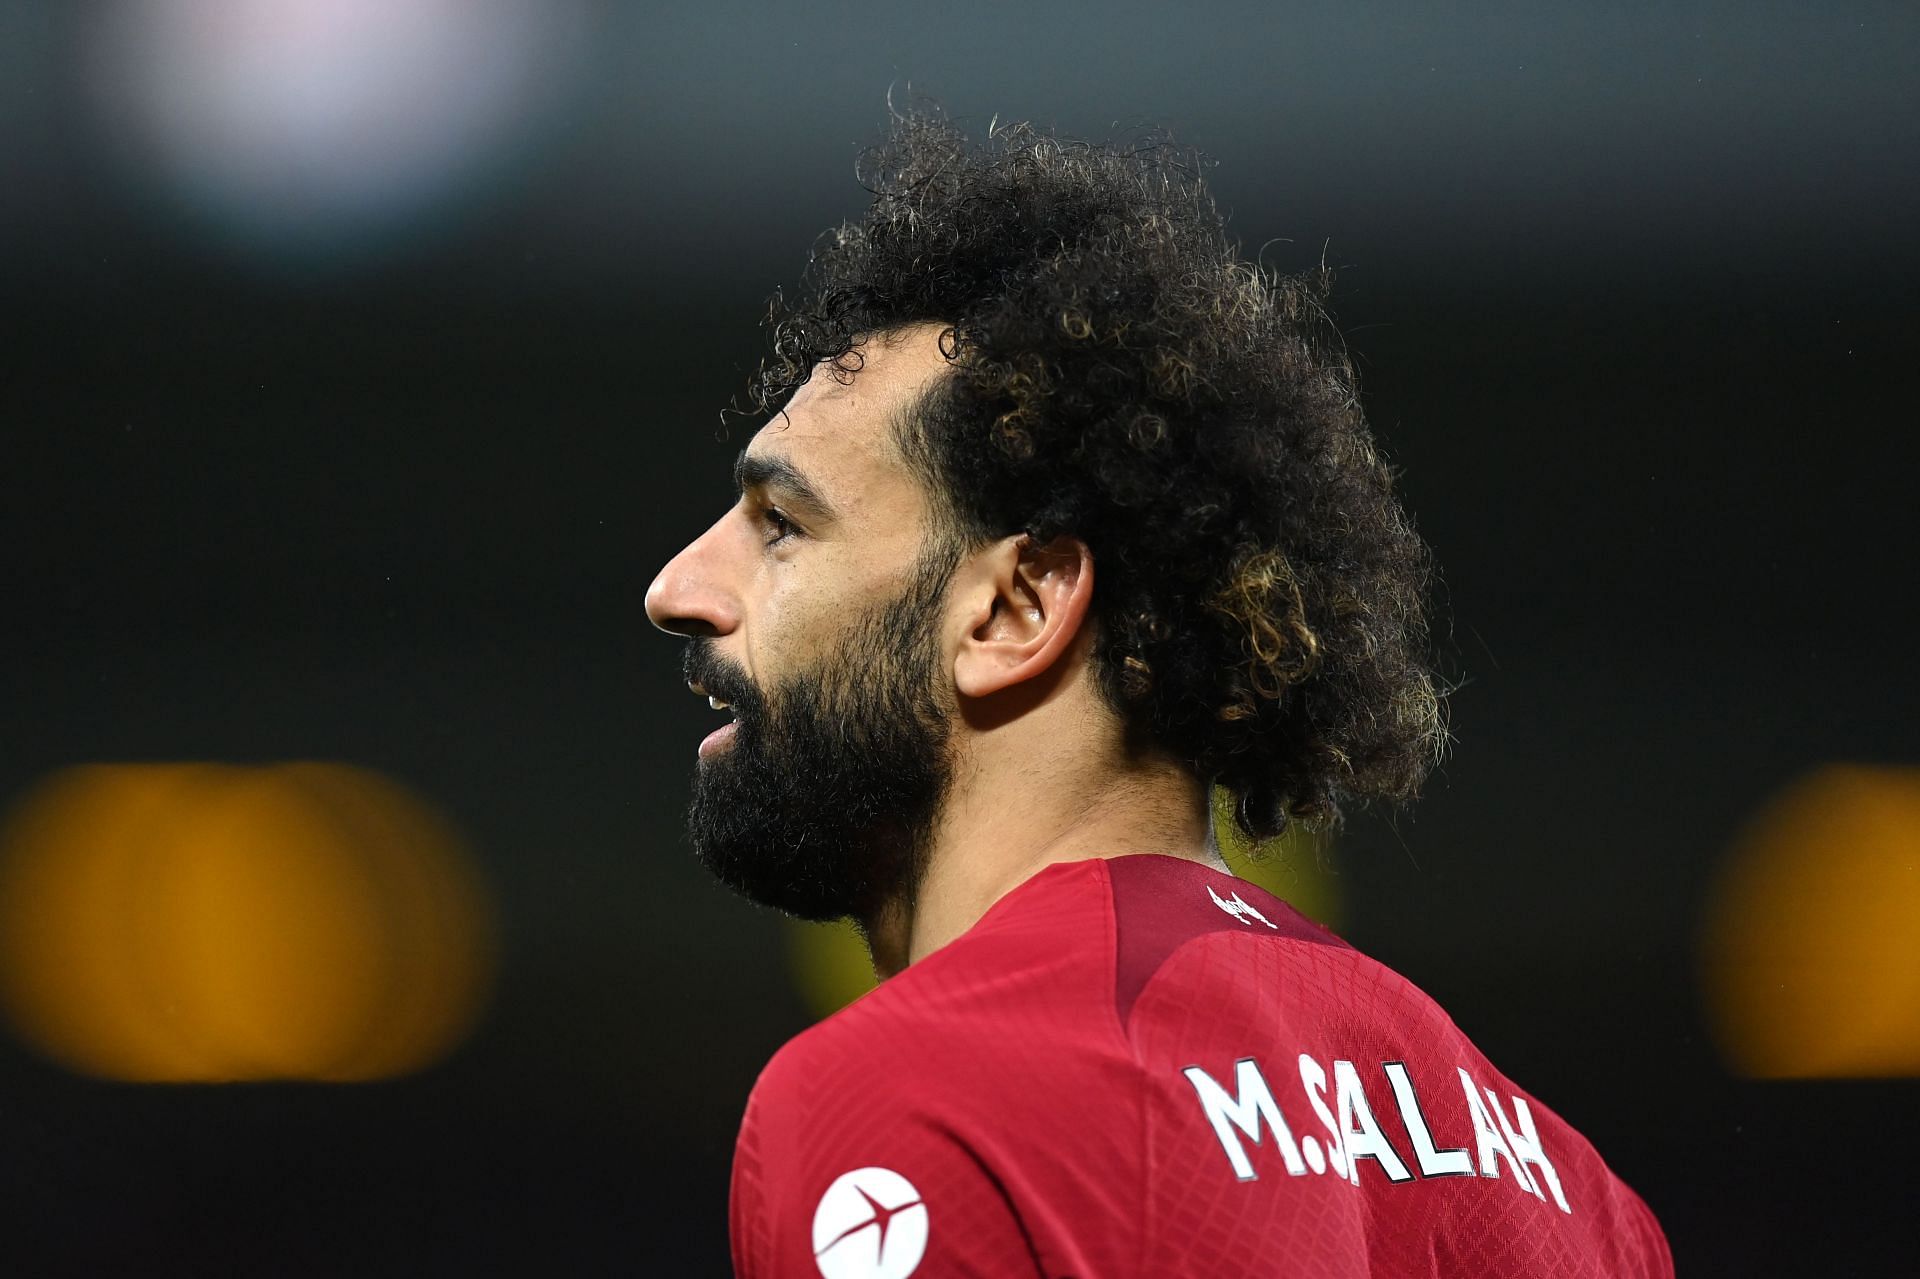 Mohamed Salah has been a phenom at Liverpool